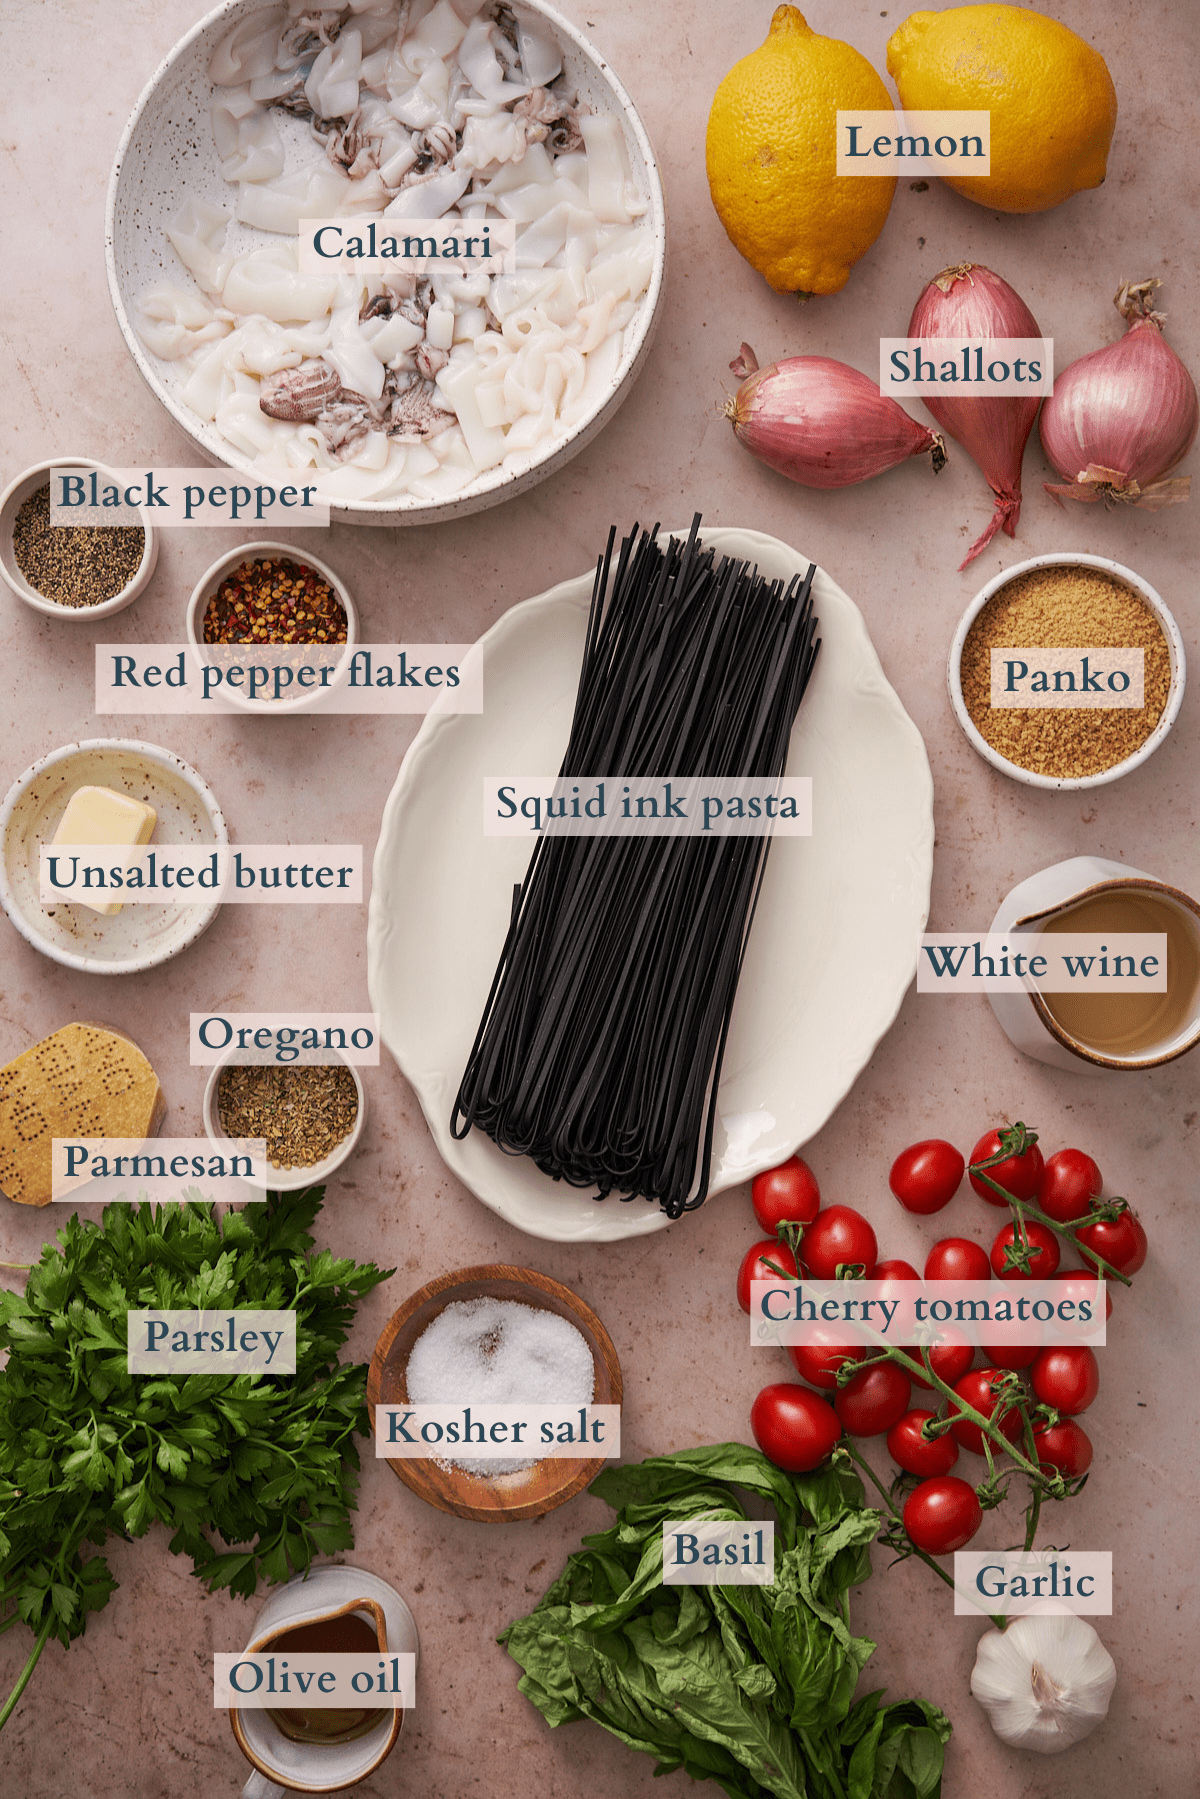 squid ink pasta ingredients separated on plates with text overlaying to denote each ingredient.